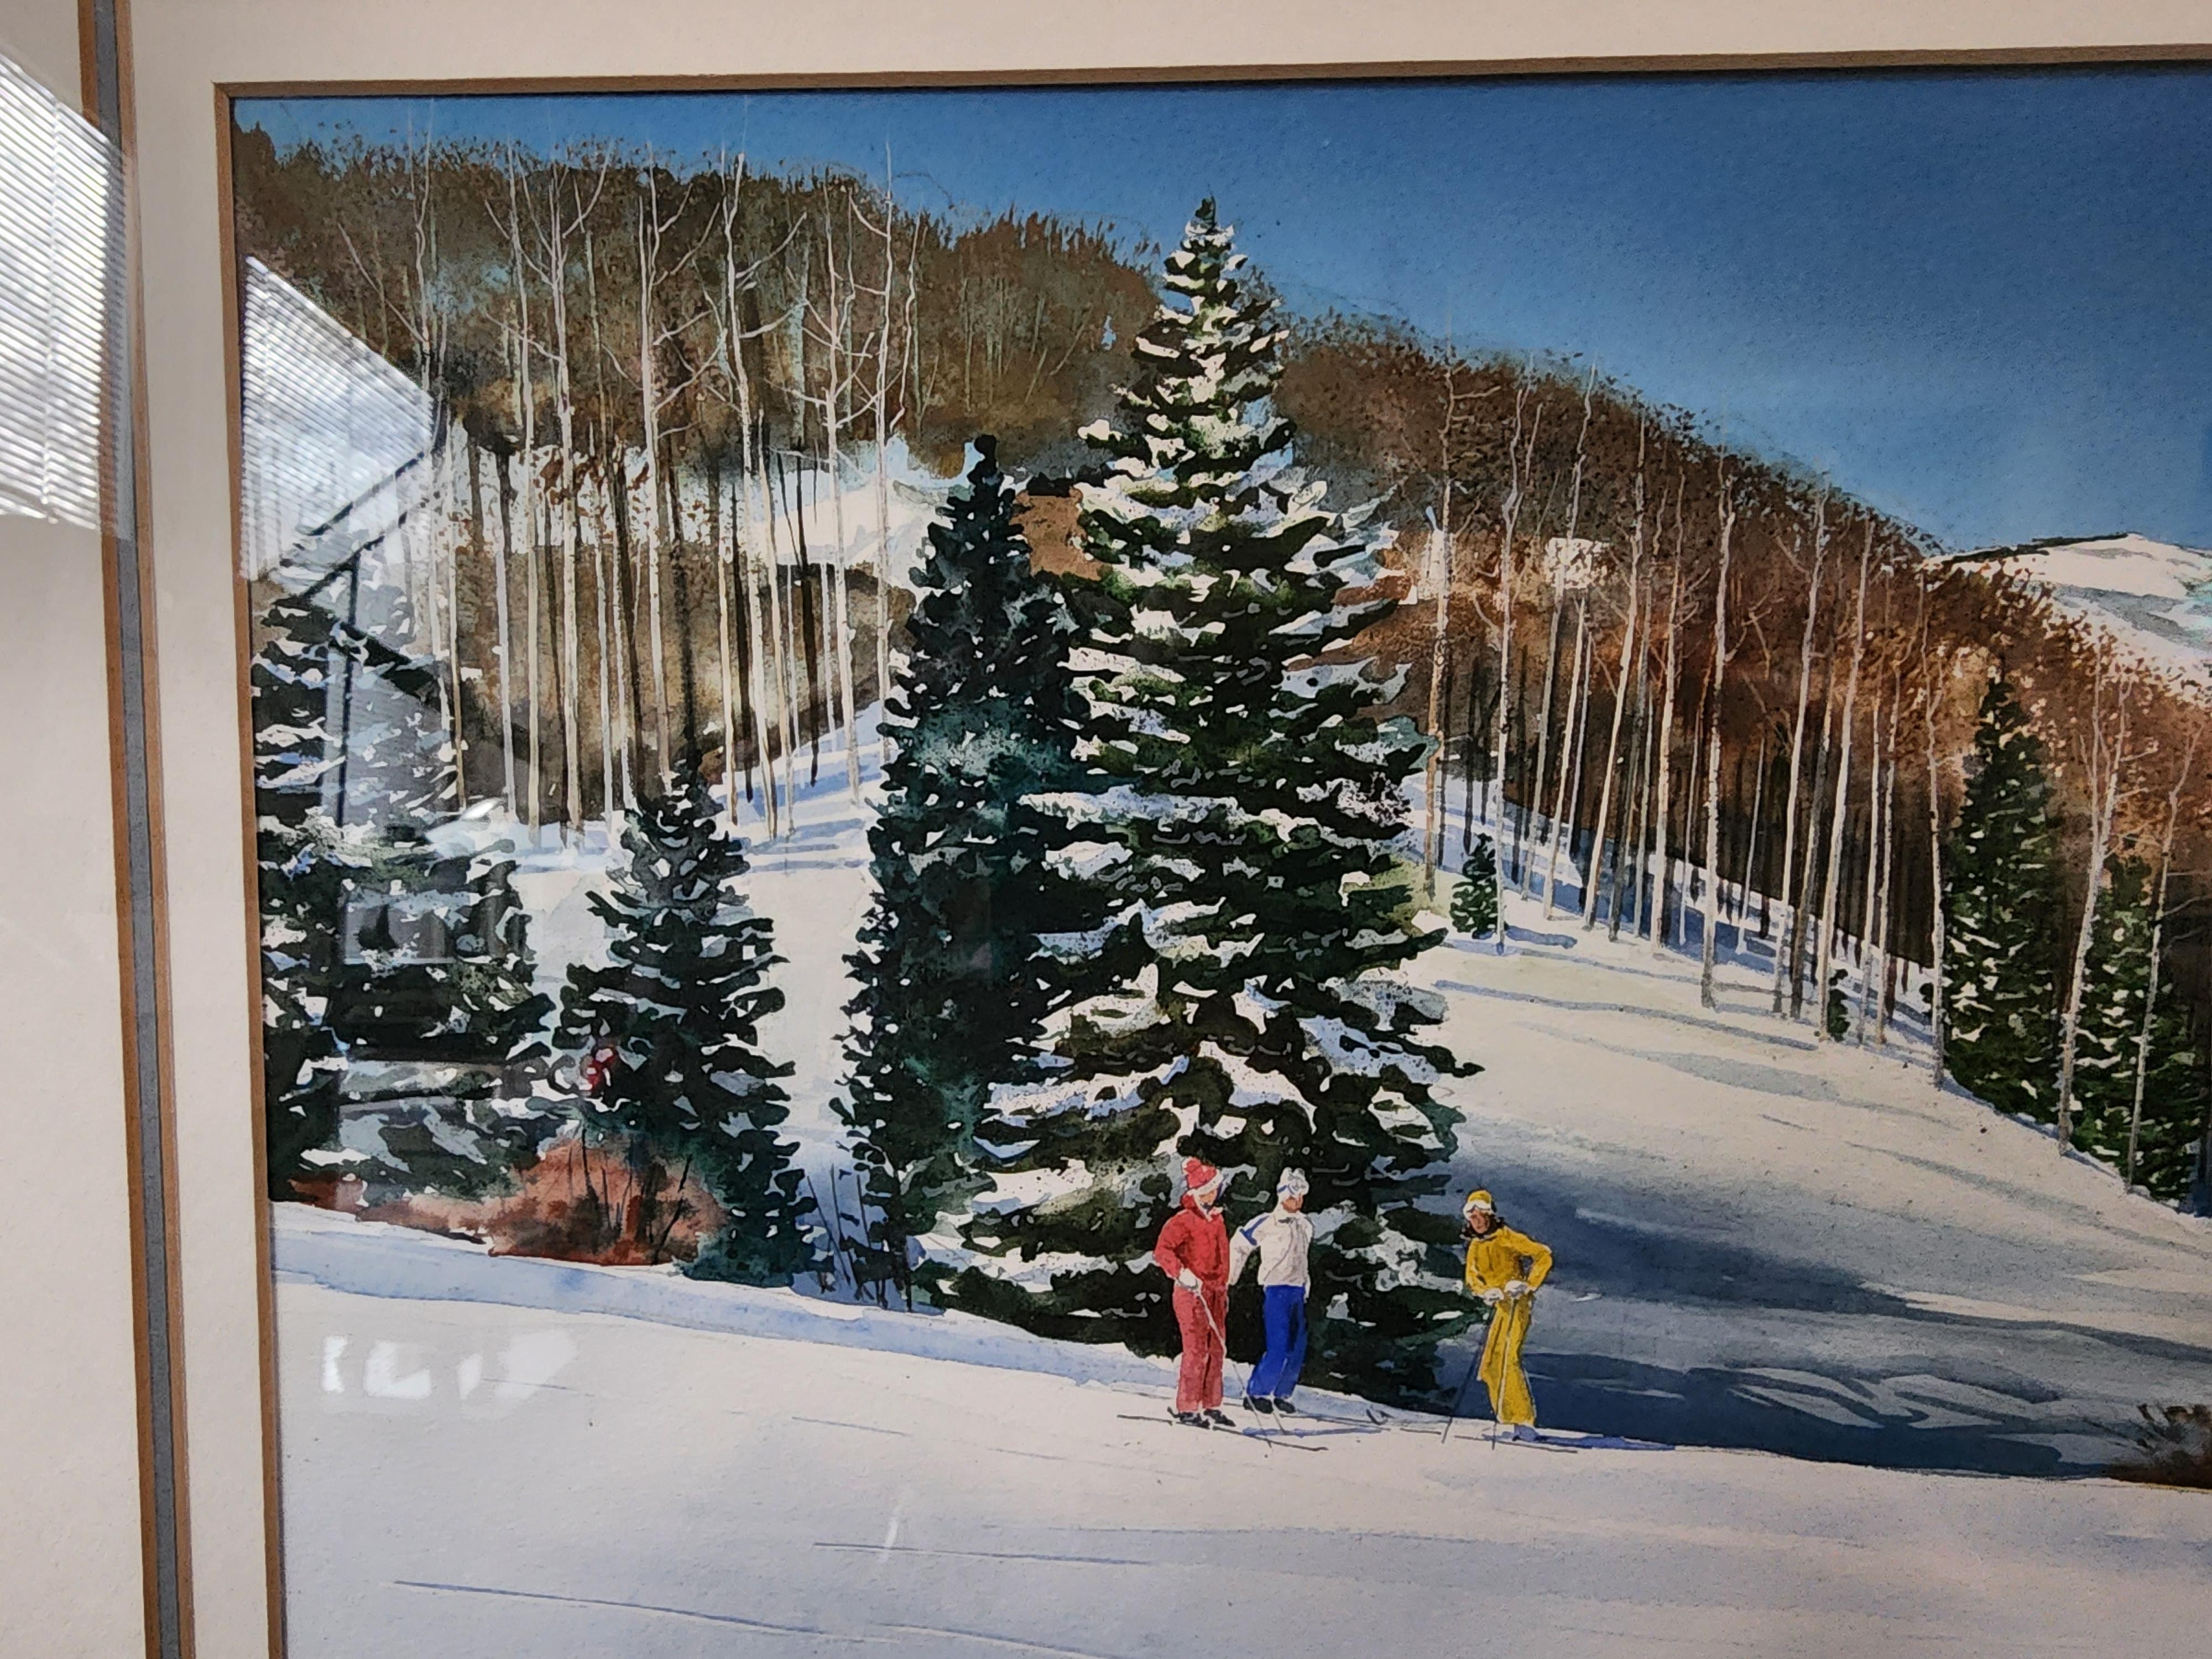 RGRFineArts is pleased to offer this beautiful watercolor by renowned North Carolina artist William Mangum of skiers on a ski run, likely in Mangum's home state of North Carolina.